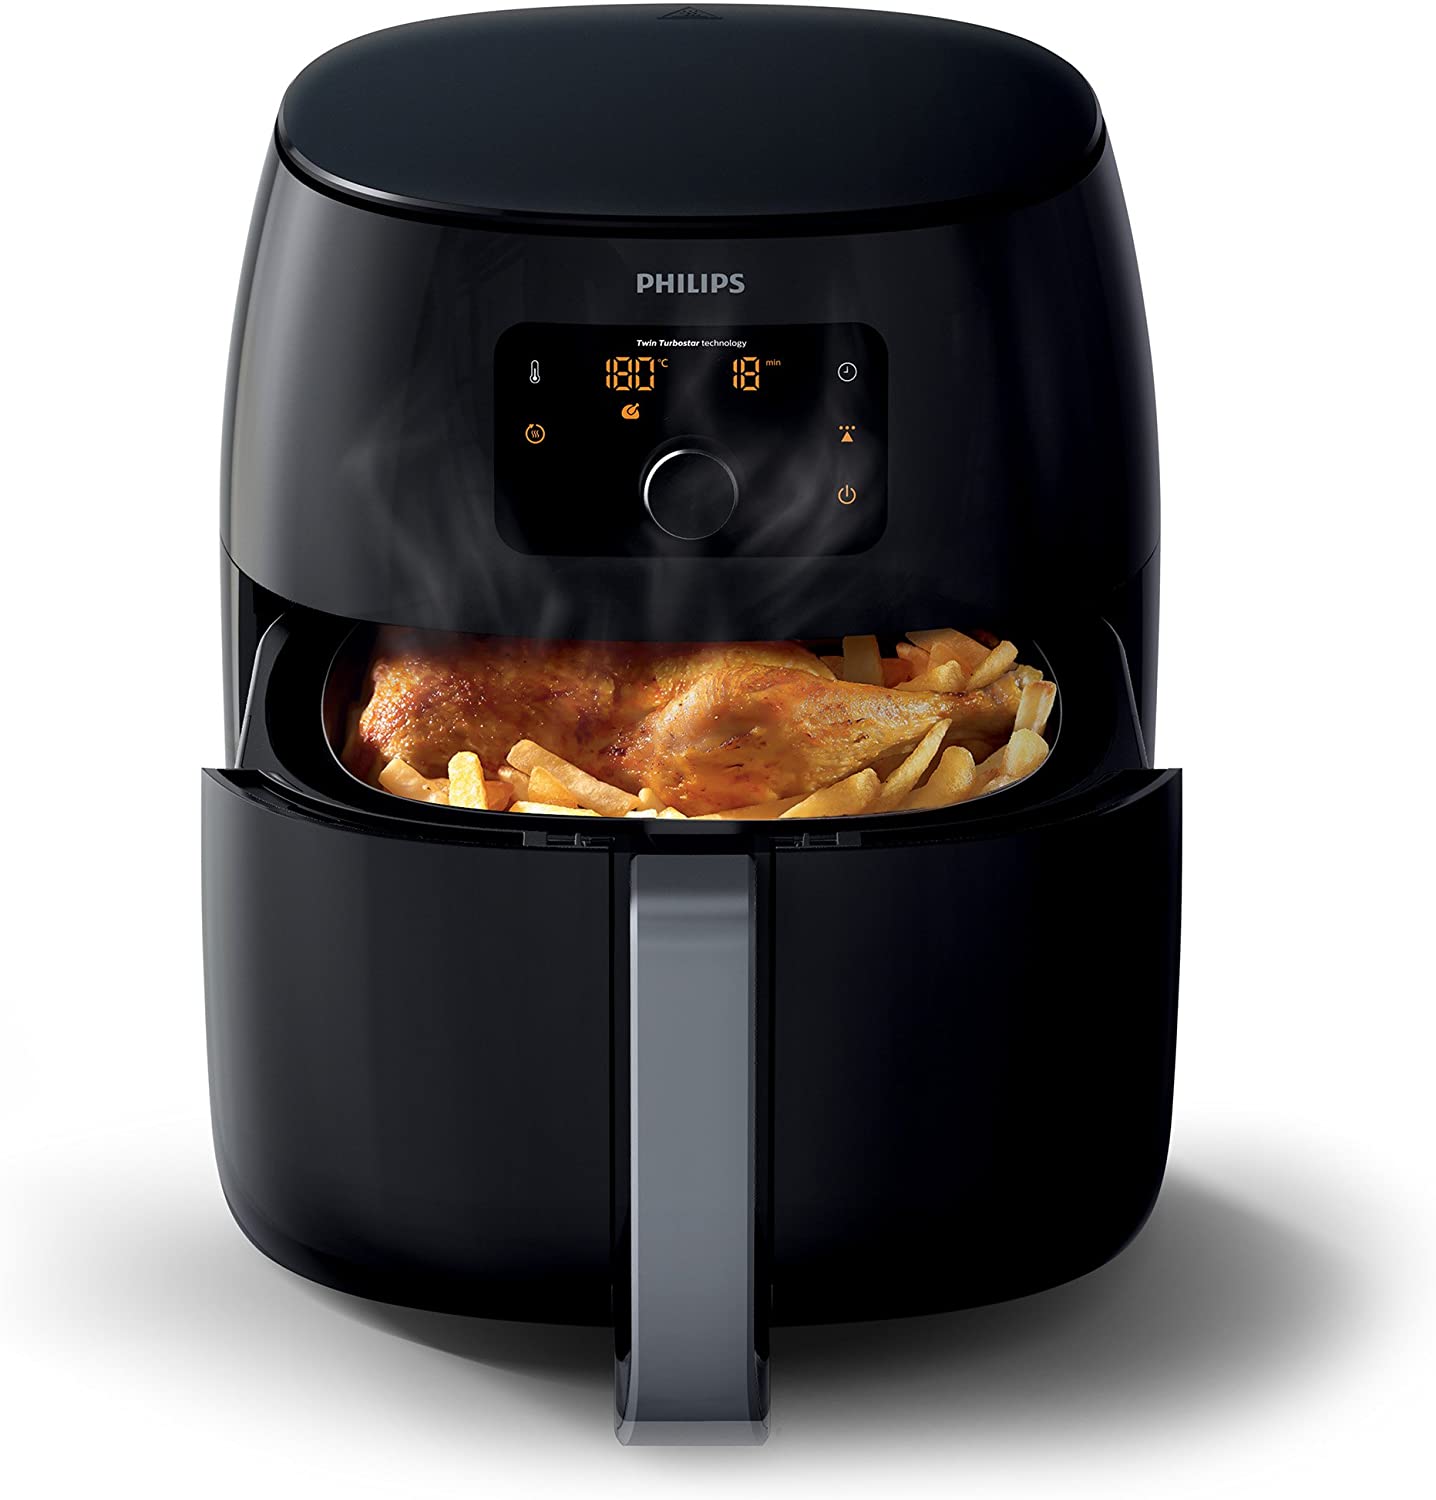 Philips Airfryer Hot Air Fryer (without Oil, Digital Display) Black